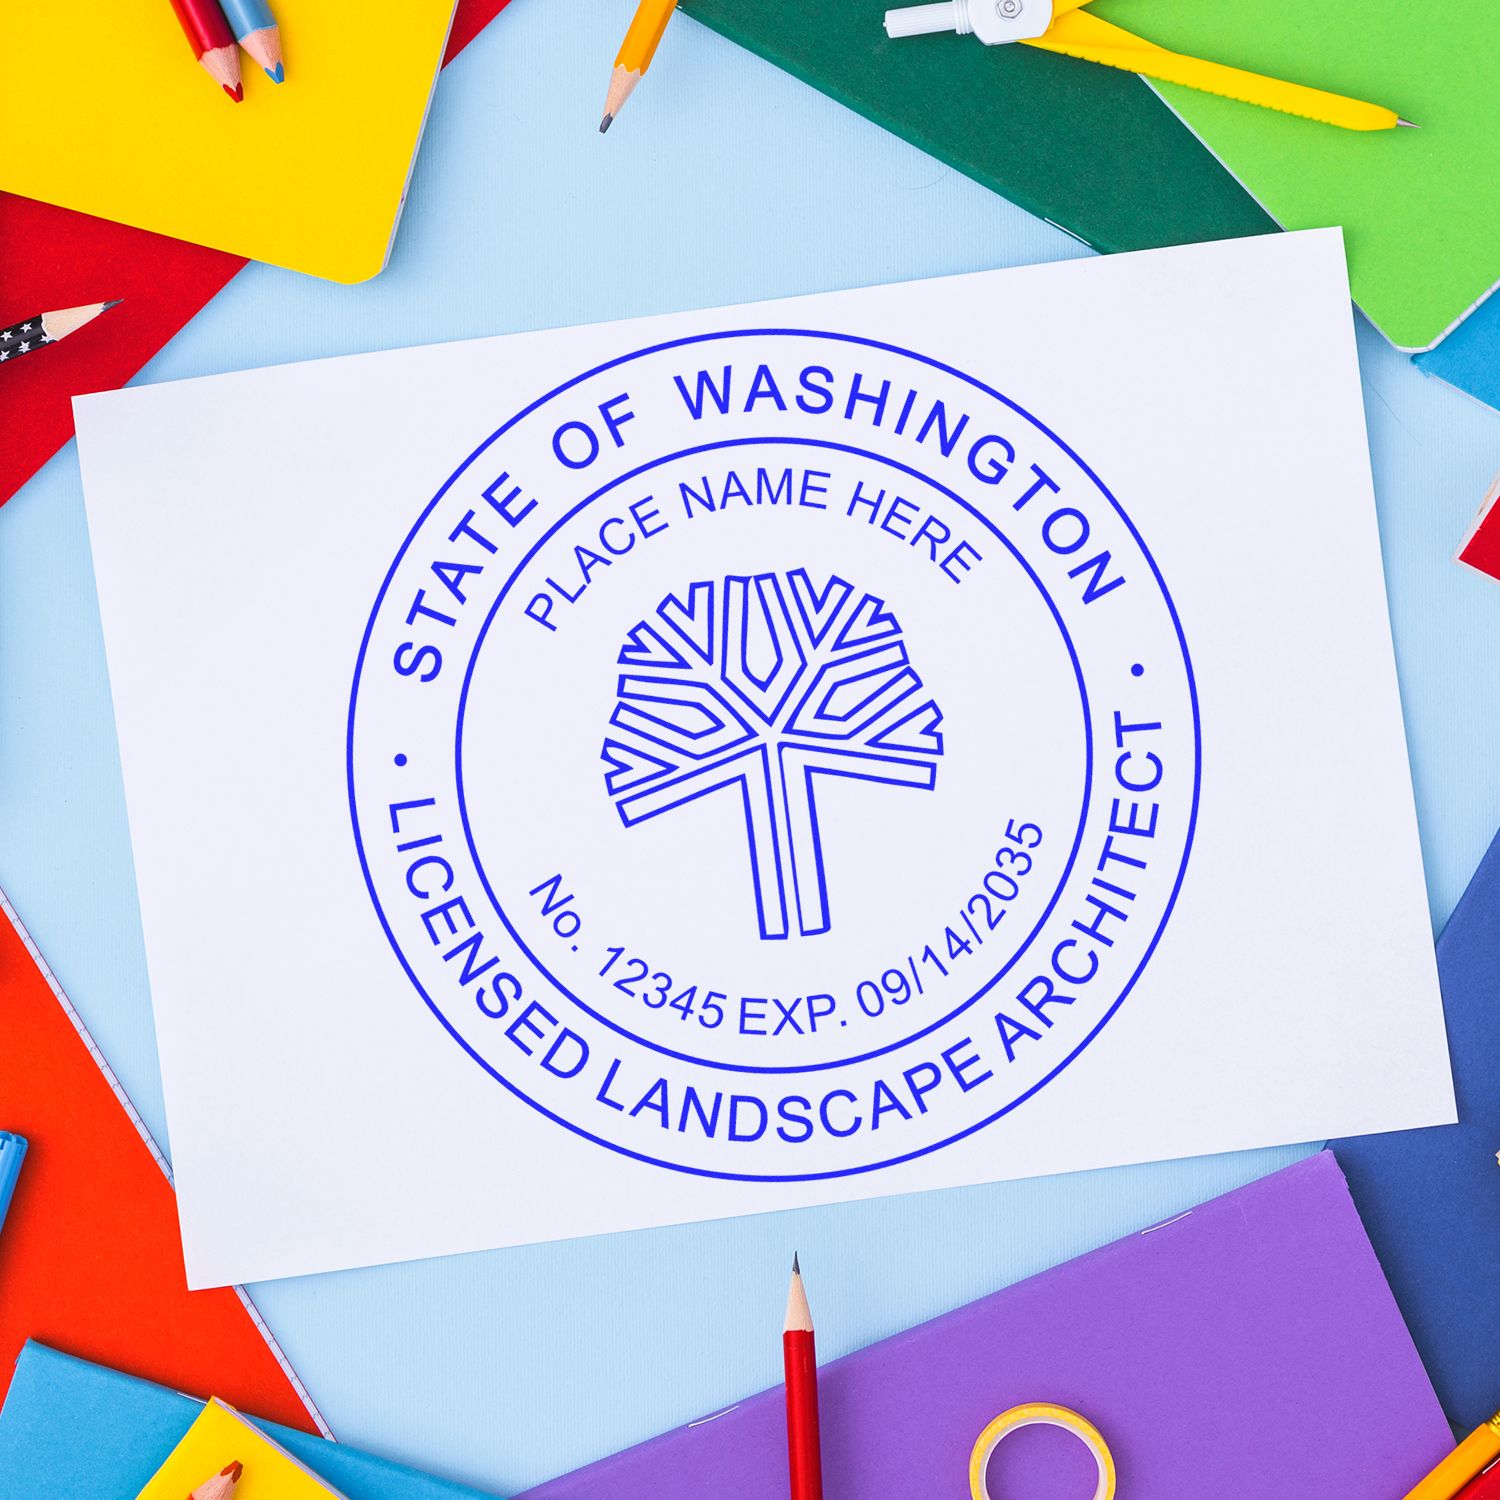 The main image for the Premium MaxLight Pre-Inked Washington Landscape Architectural Stamp depicting a sample of the imprint and electronic files